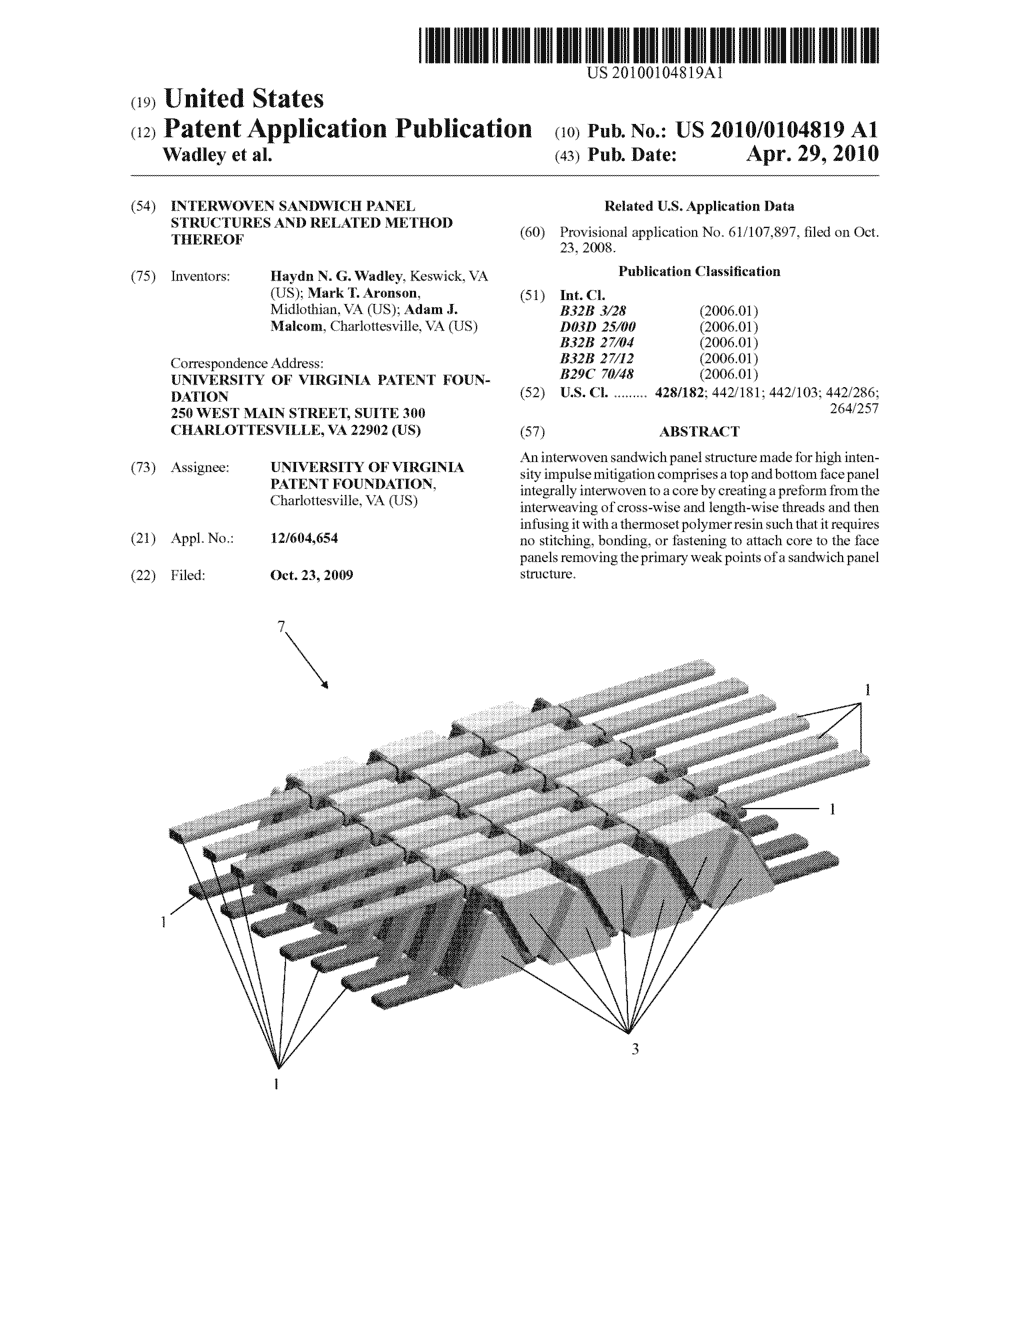 INTERWOVEN SANDWICH PANEL STRUCTURES AND RELATED METHOD THEREOF - diagram, schematic, and image 01